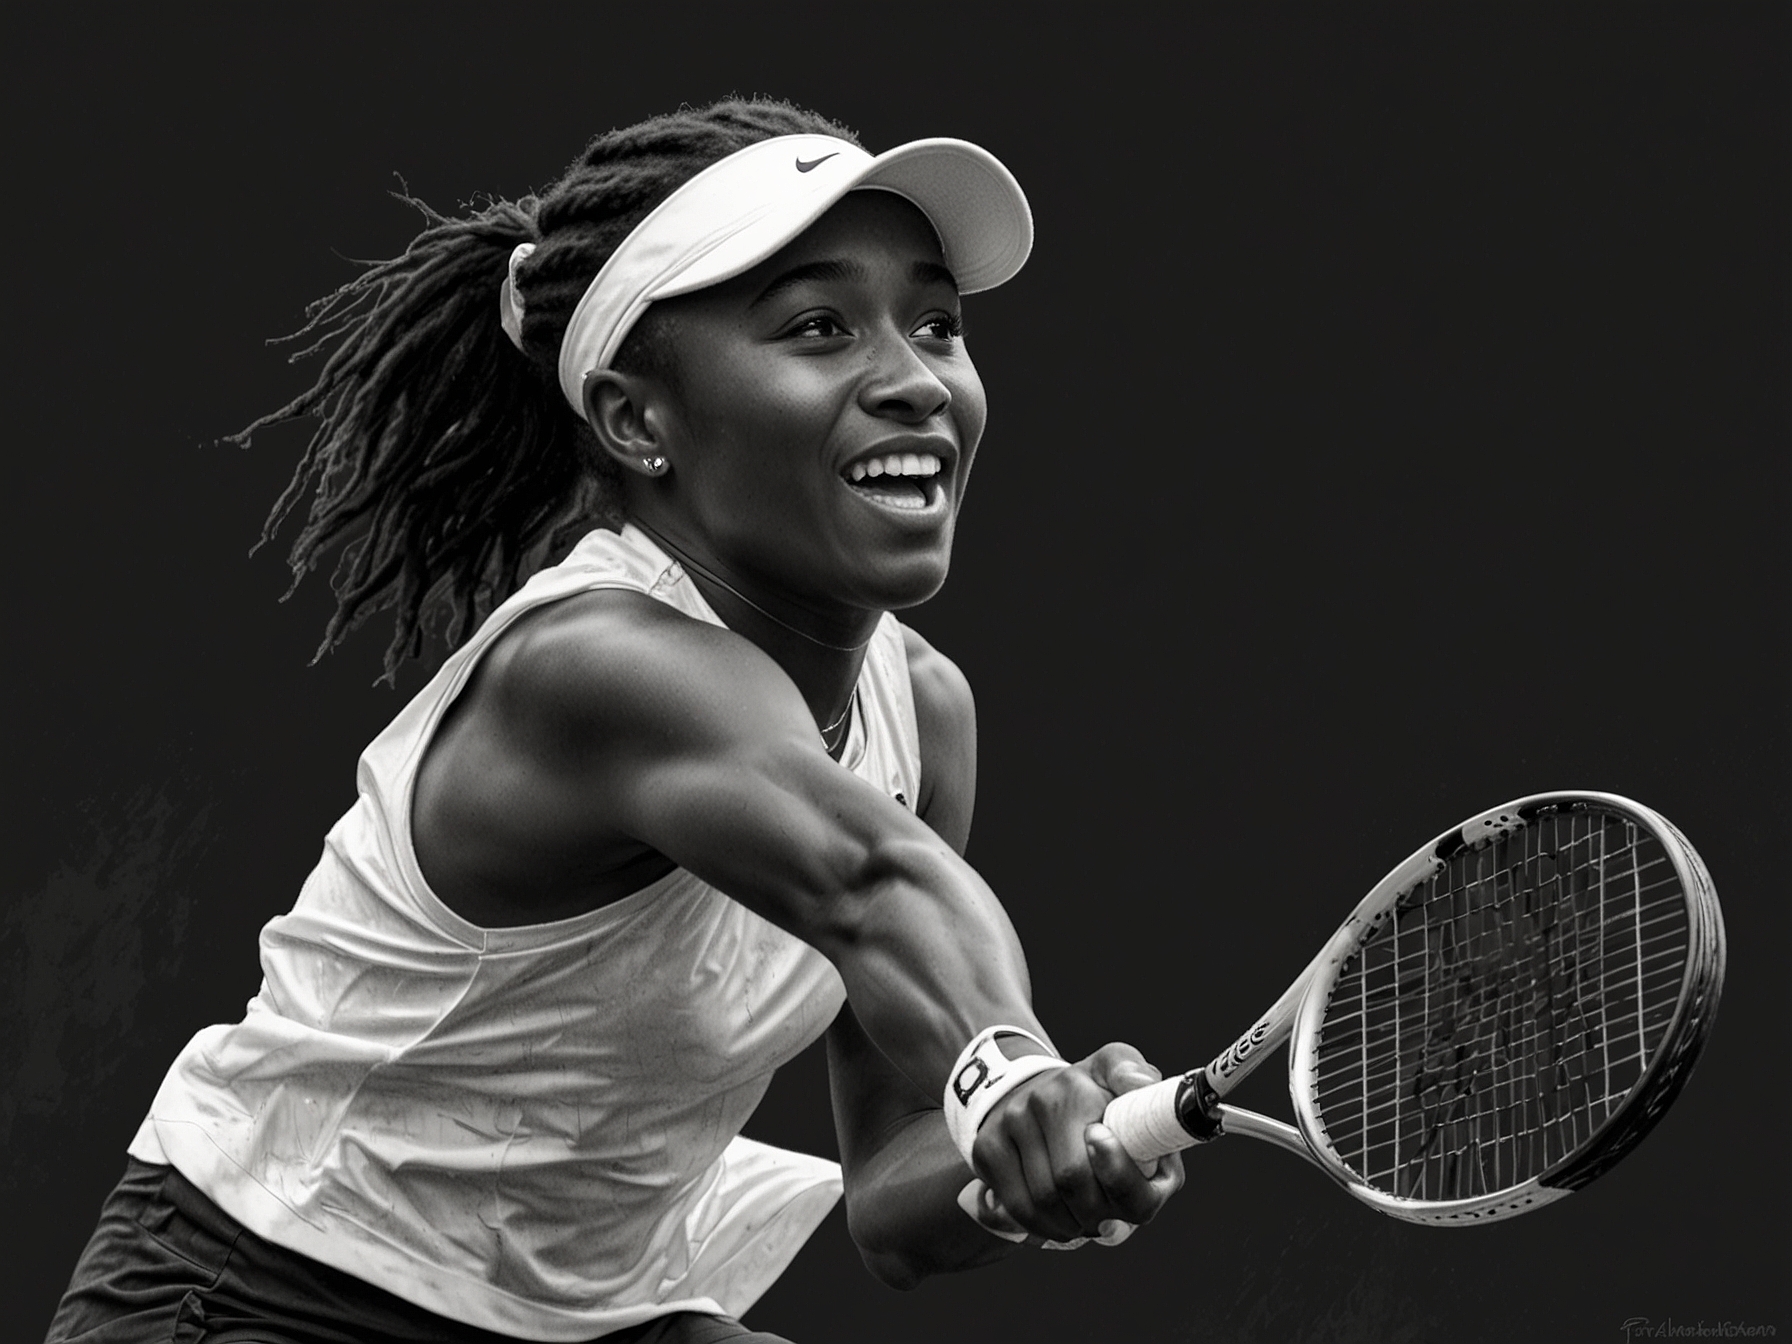 Coco Gauff in action at Wimbledon, showcasing her powerful serve and exceptional agility during her dominant victory over Caroline Dolehide in the opening round.